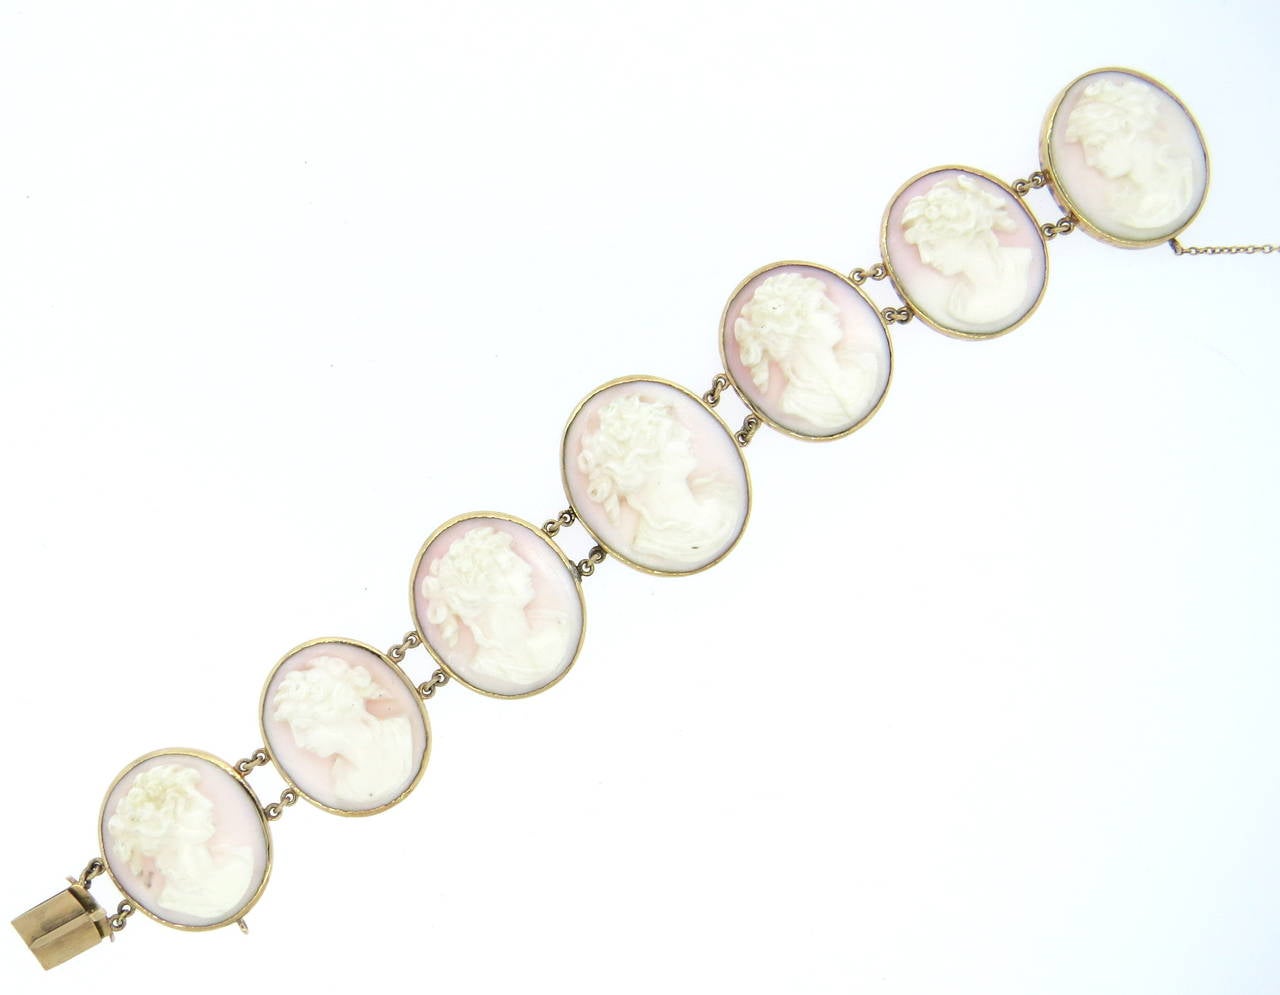 14k gold bracelet with 7 oval coral cameos, gradually measuring 24mm x 21mm to 28mm x 24mm . Bracelet is 7 1/8